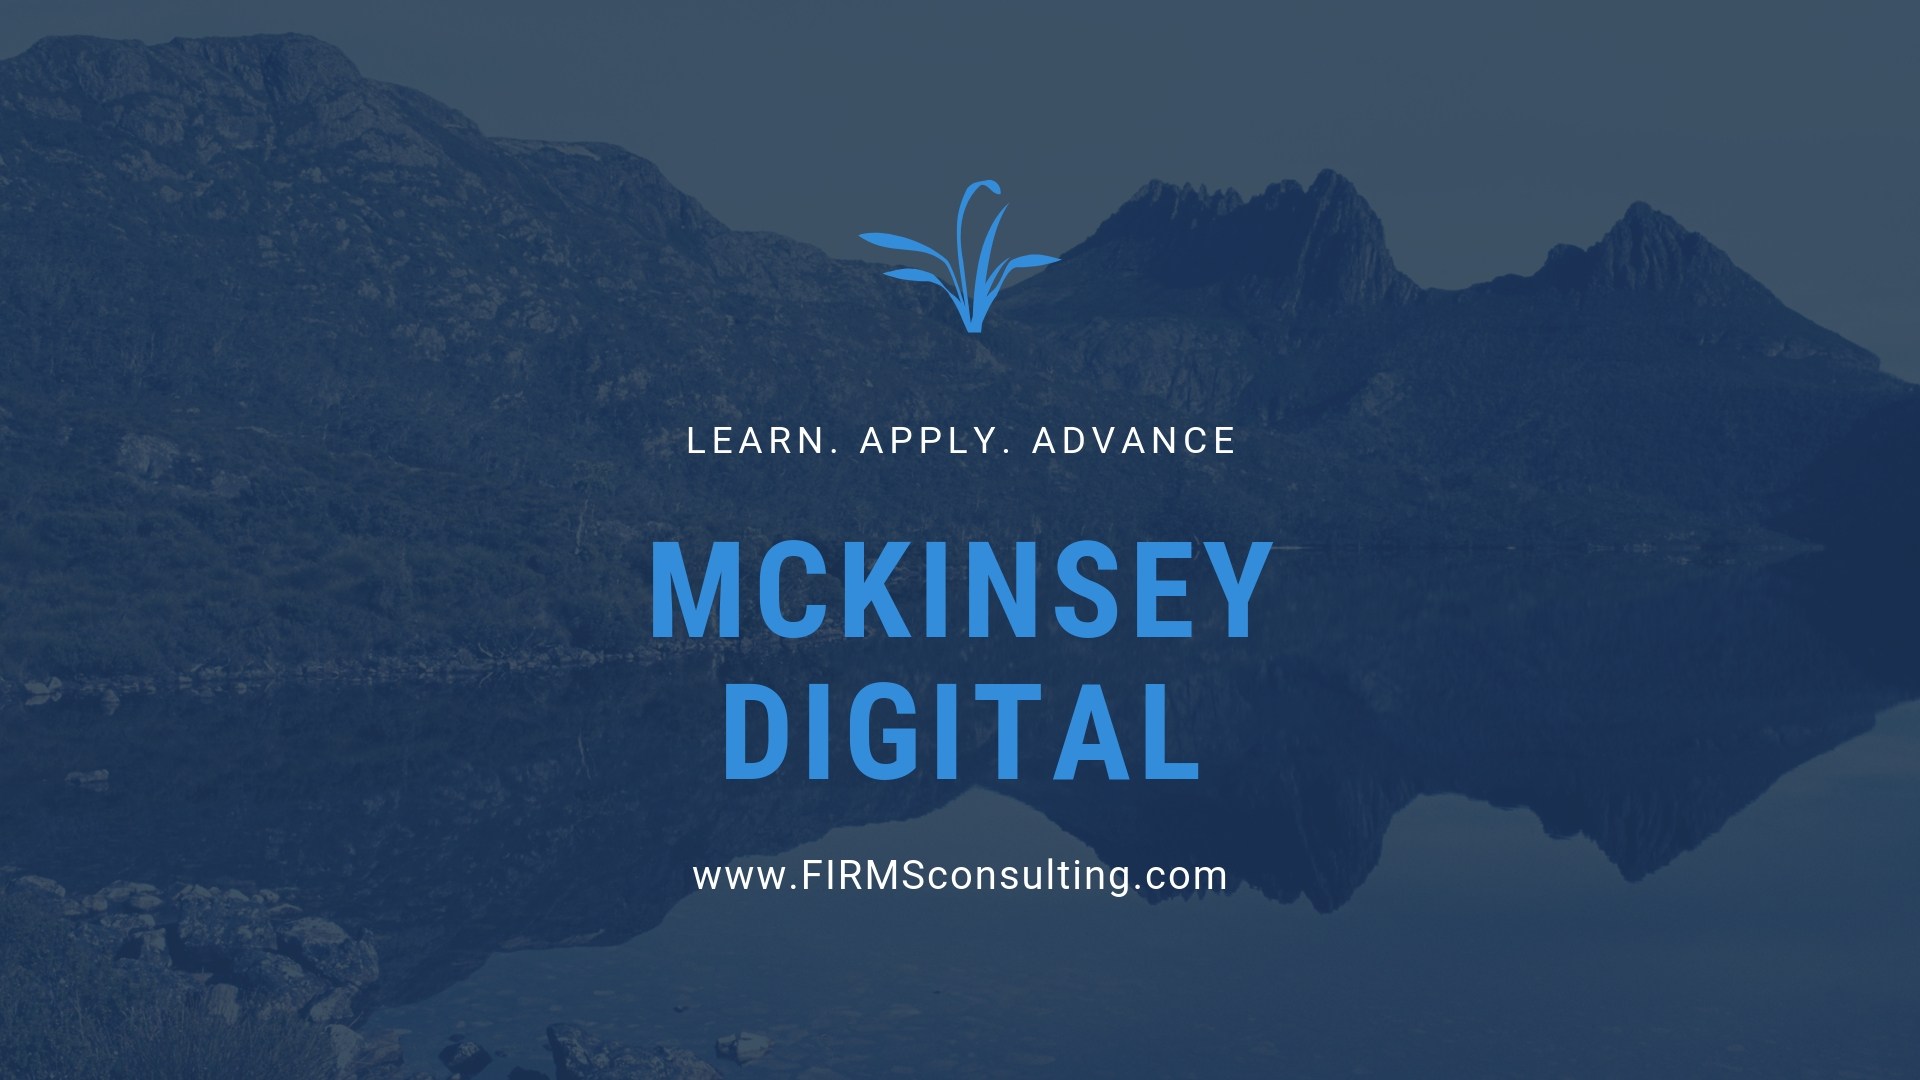 Mckinsey Digital Firmsconsulting L Strategy Skills Case Inters